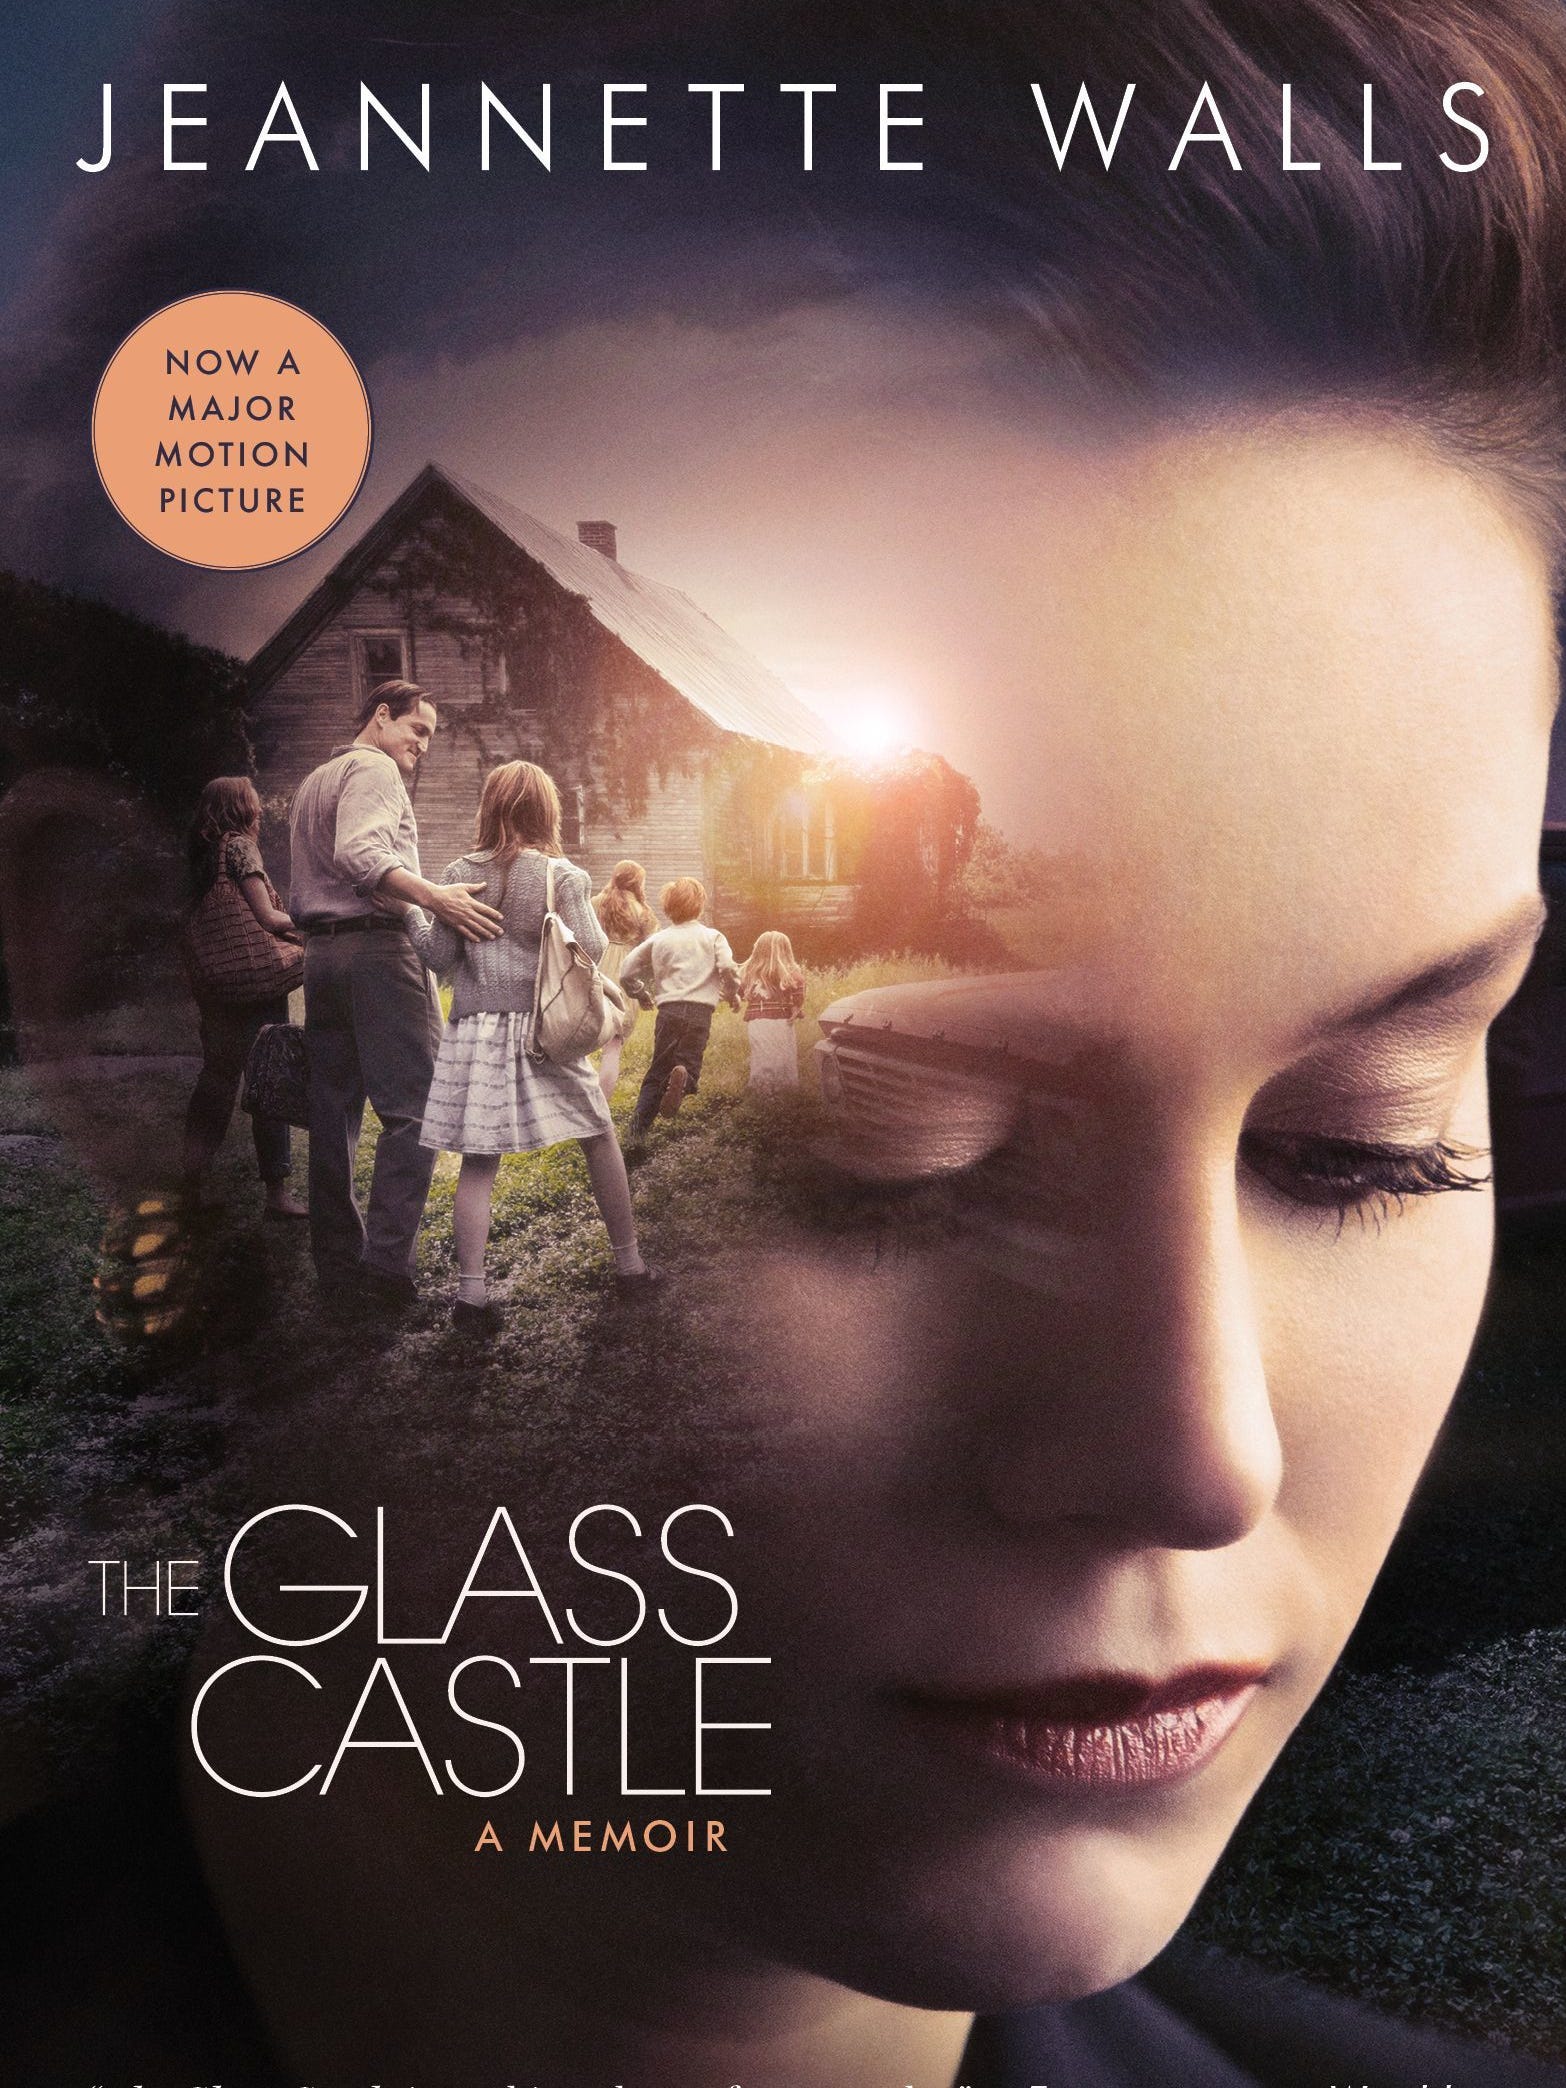 Image for "The Glass Castle"